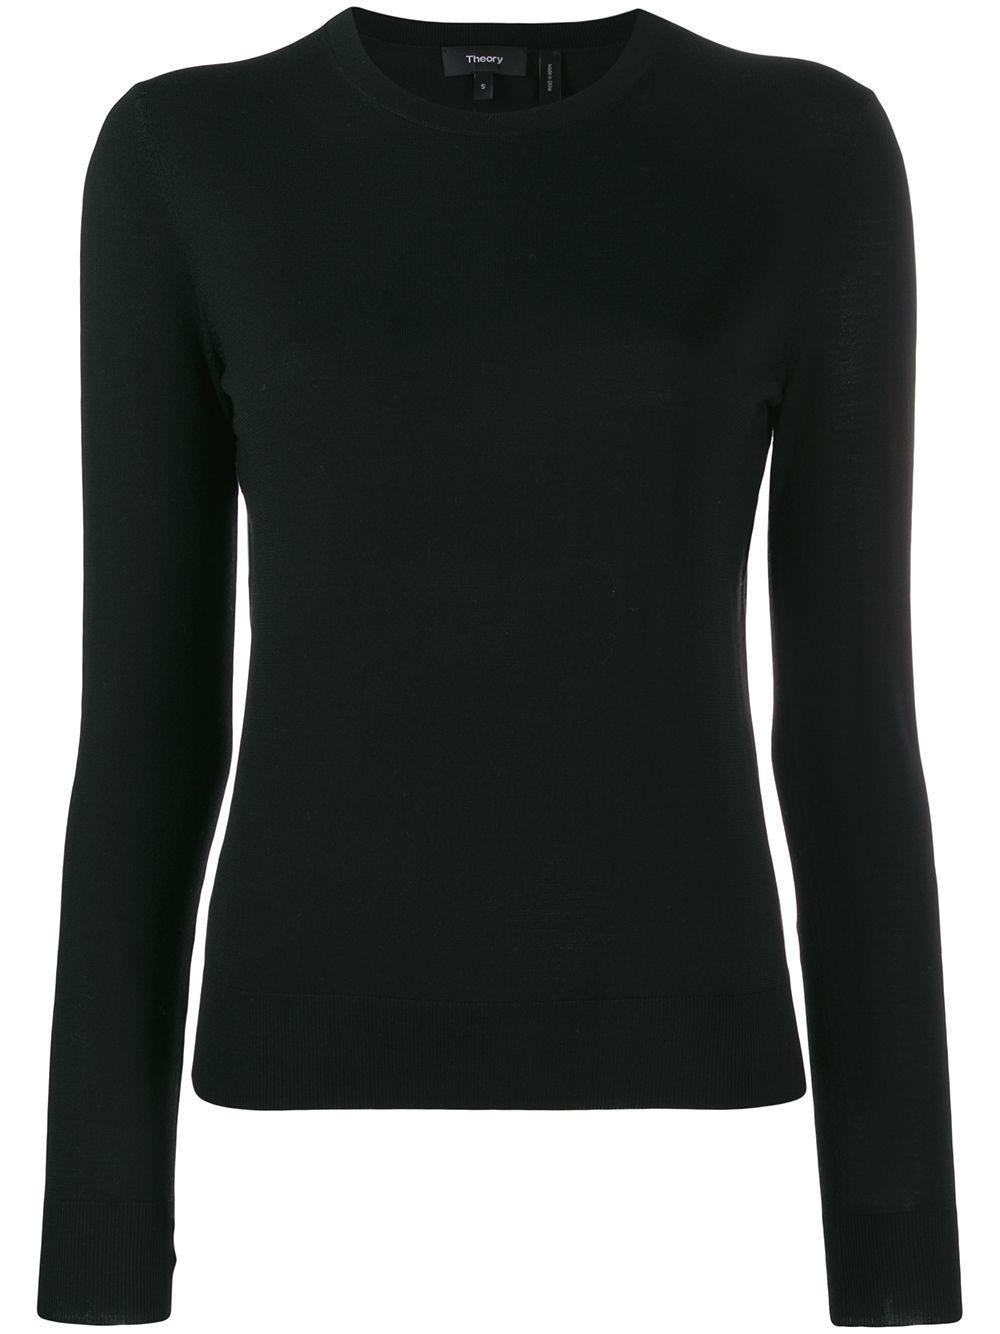 crew neck pullover by THEORY